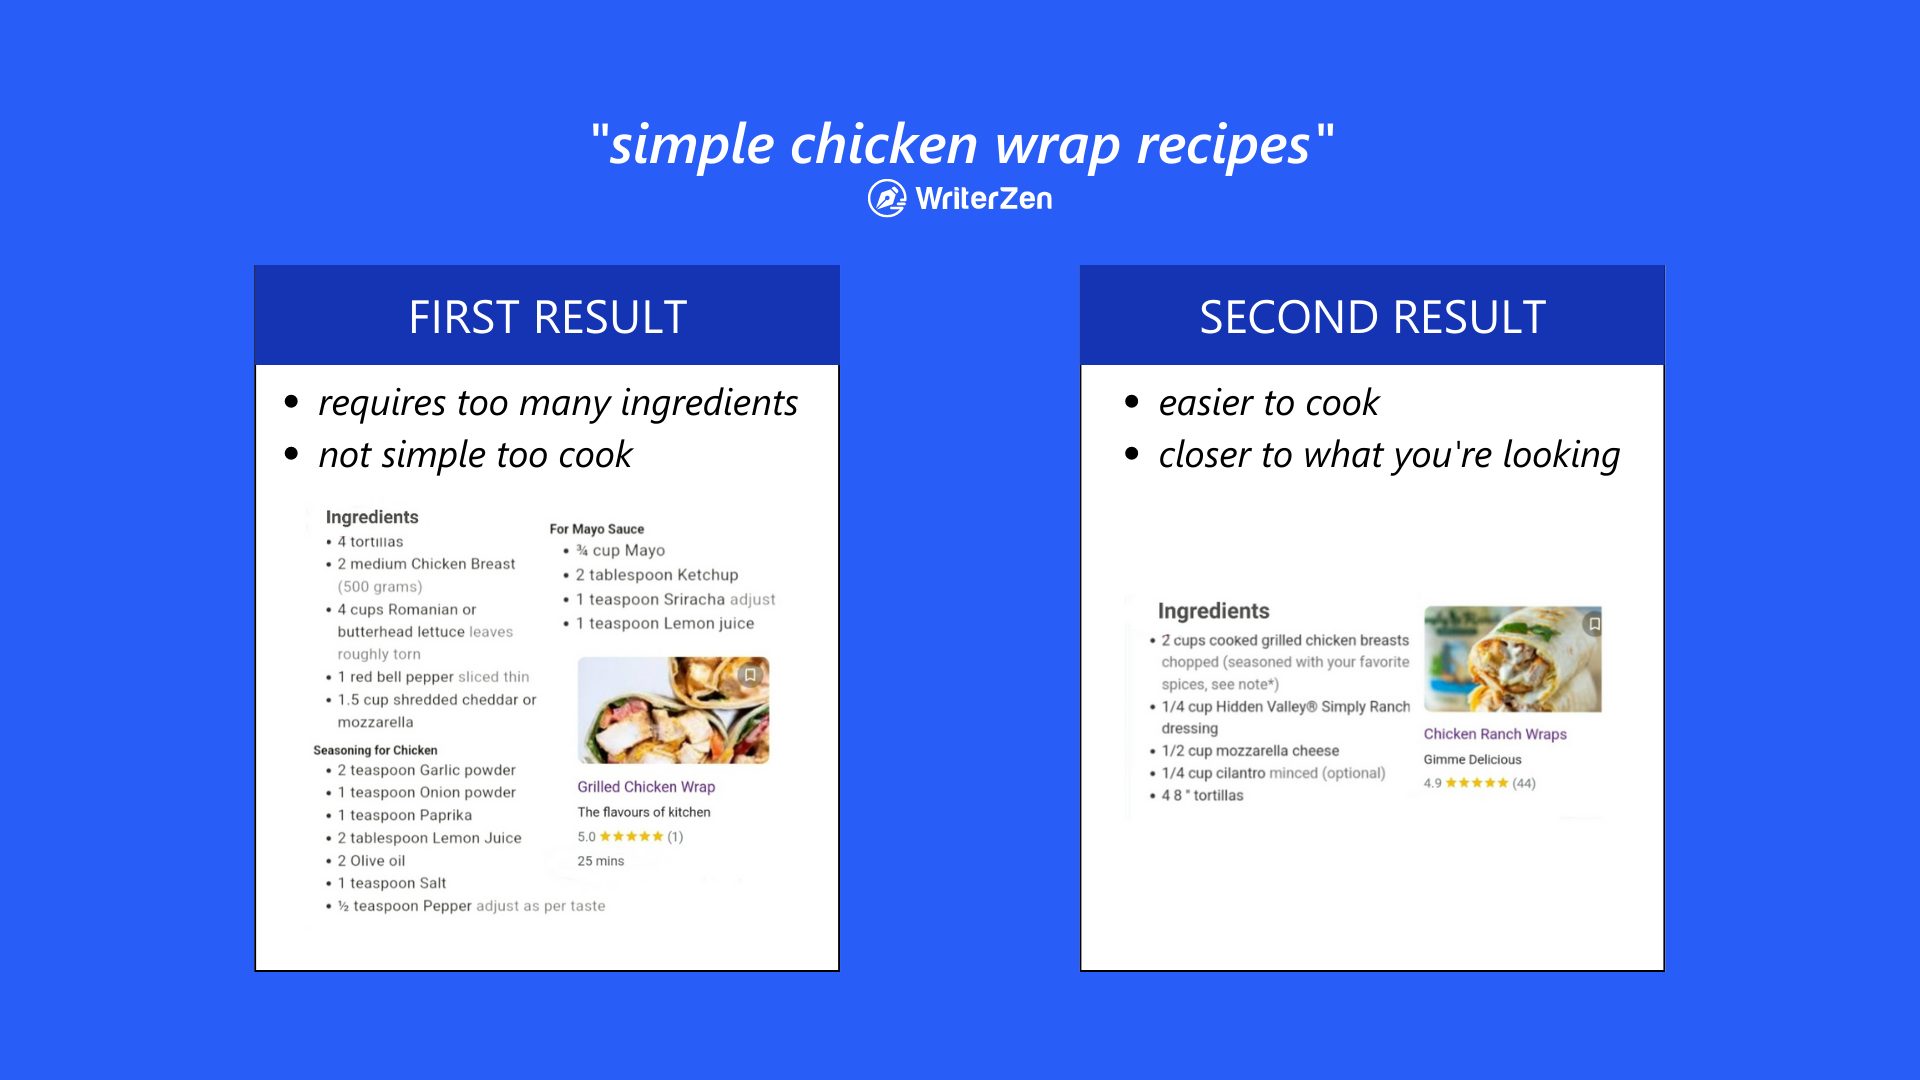 Comparing Two Search Results of Simple Chicken Wrap Recipes